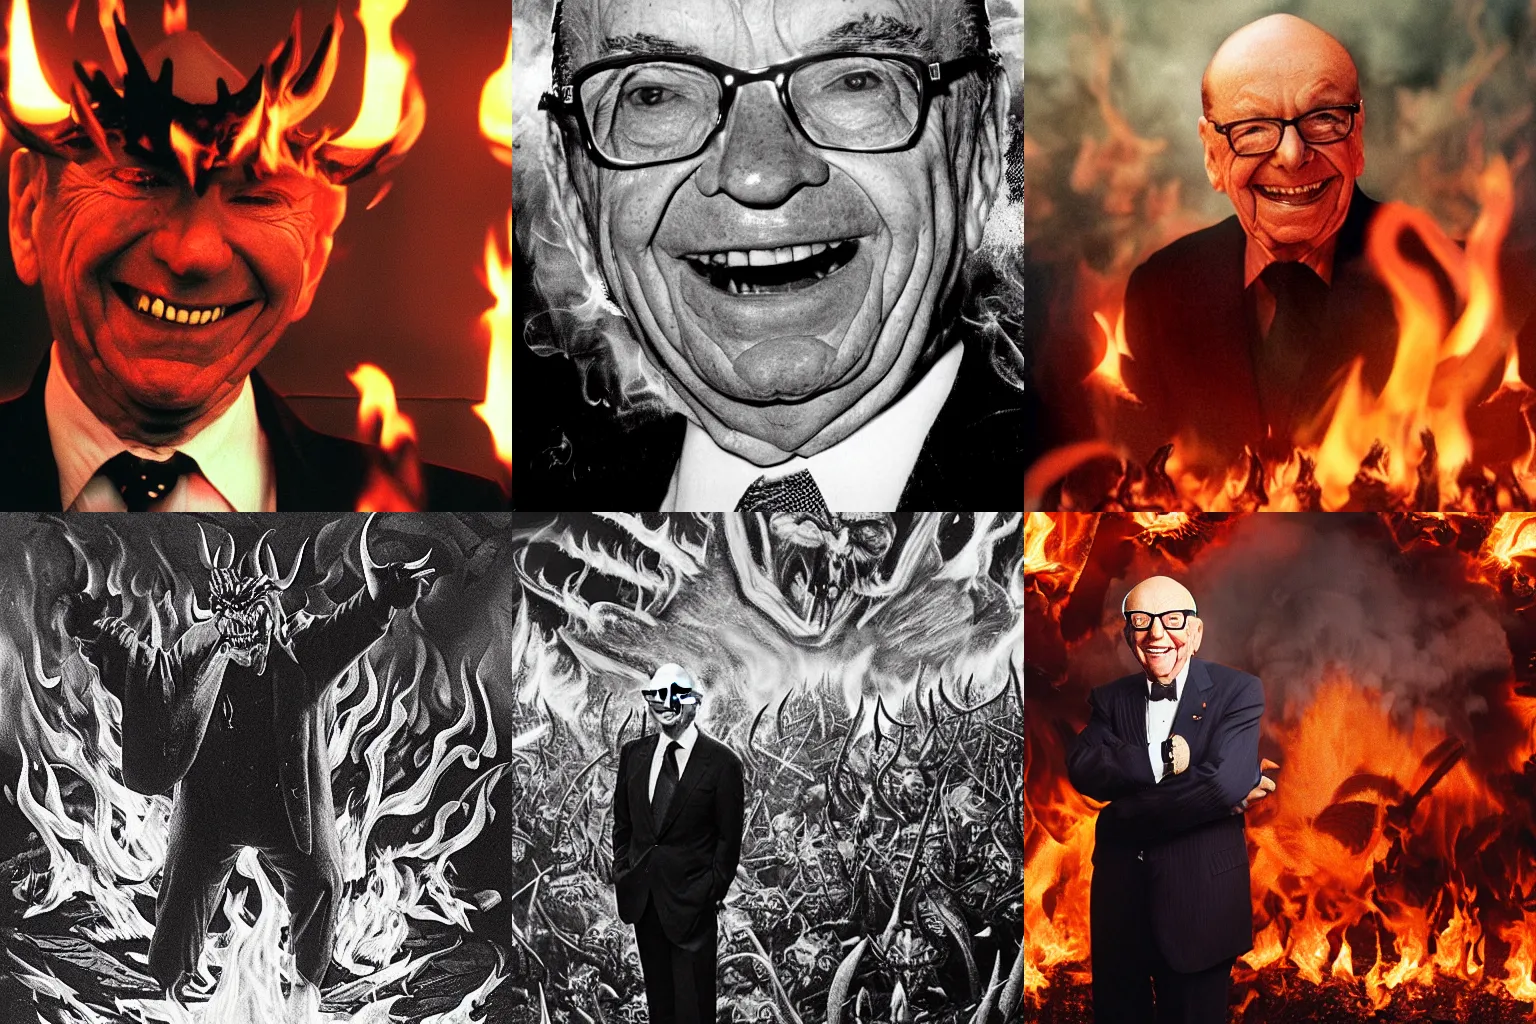 Prompt: Rupert Murdoch smiling as the Devil standing in front of his satanic army in hell, photo realistic, 35mm photograph, fire and flames and smoke, depth of field